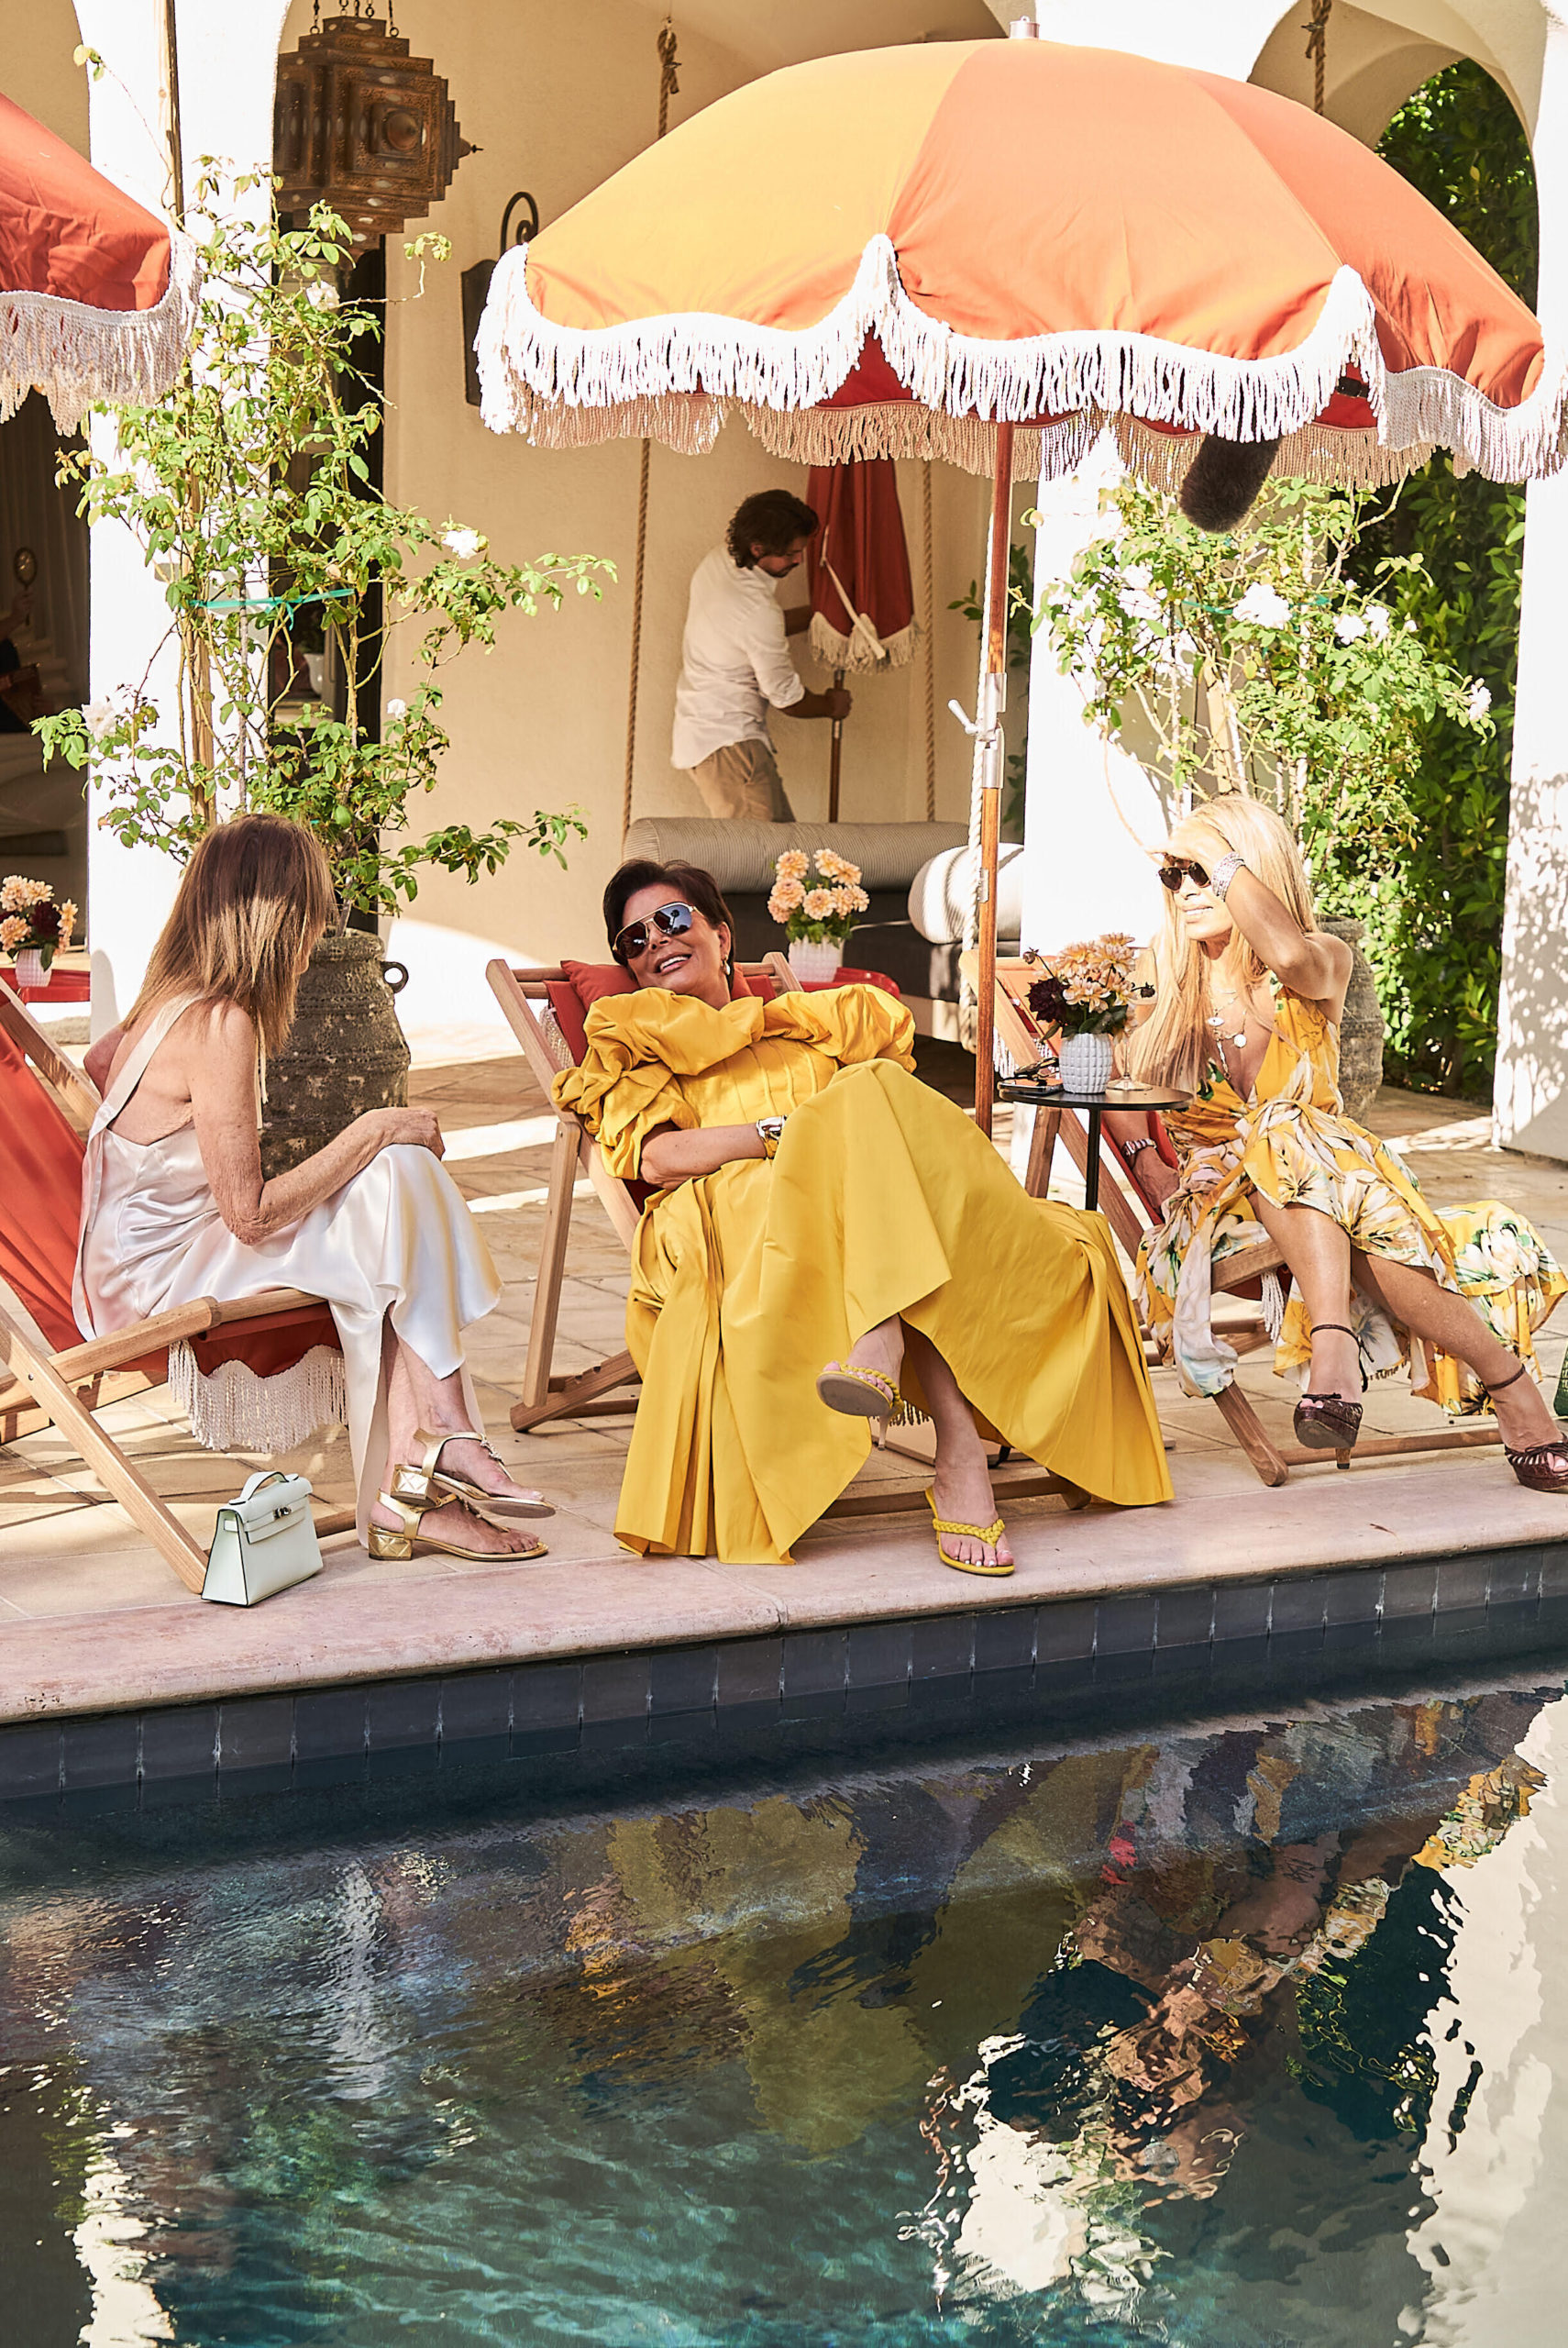 kris jenner and friends poolside